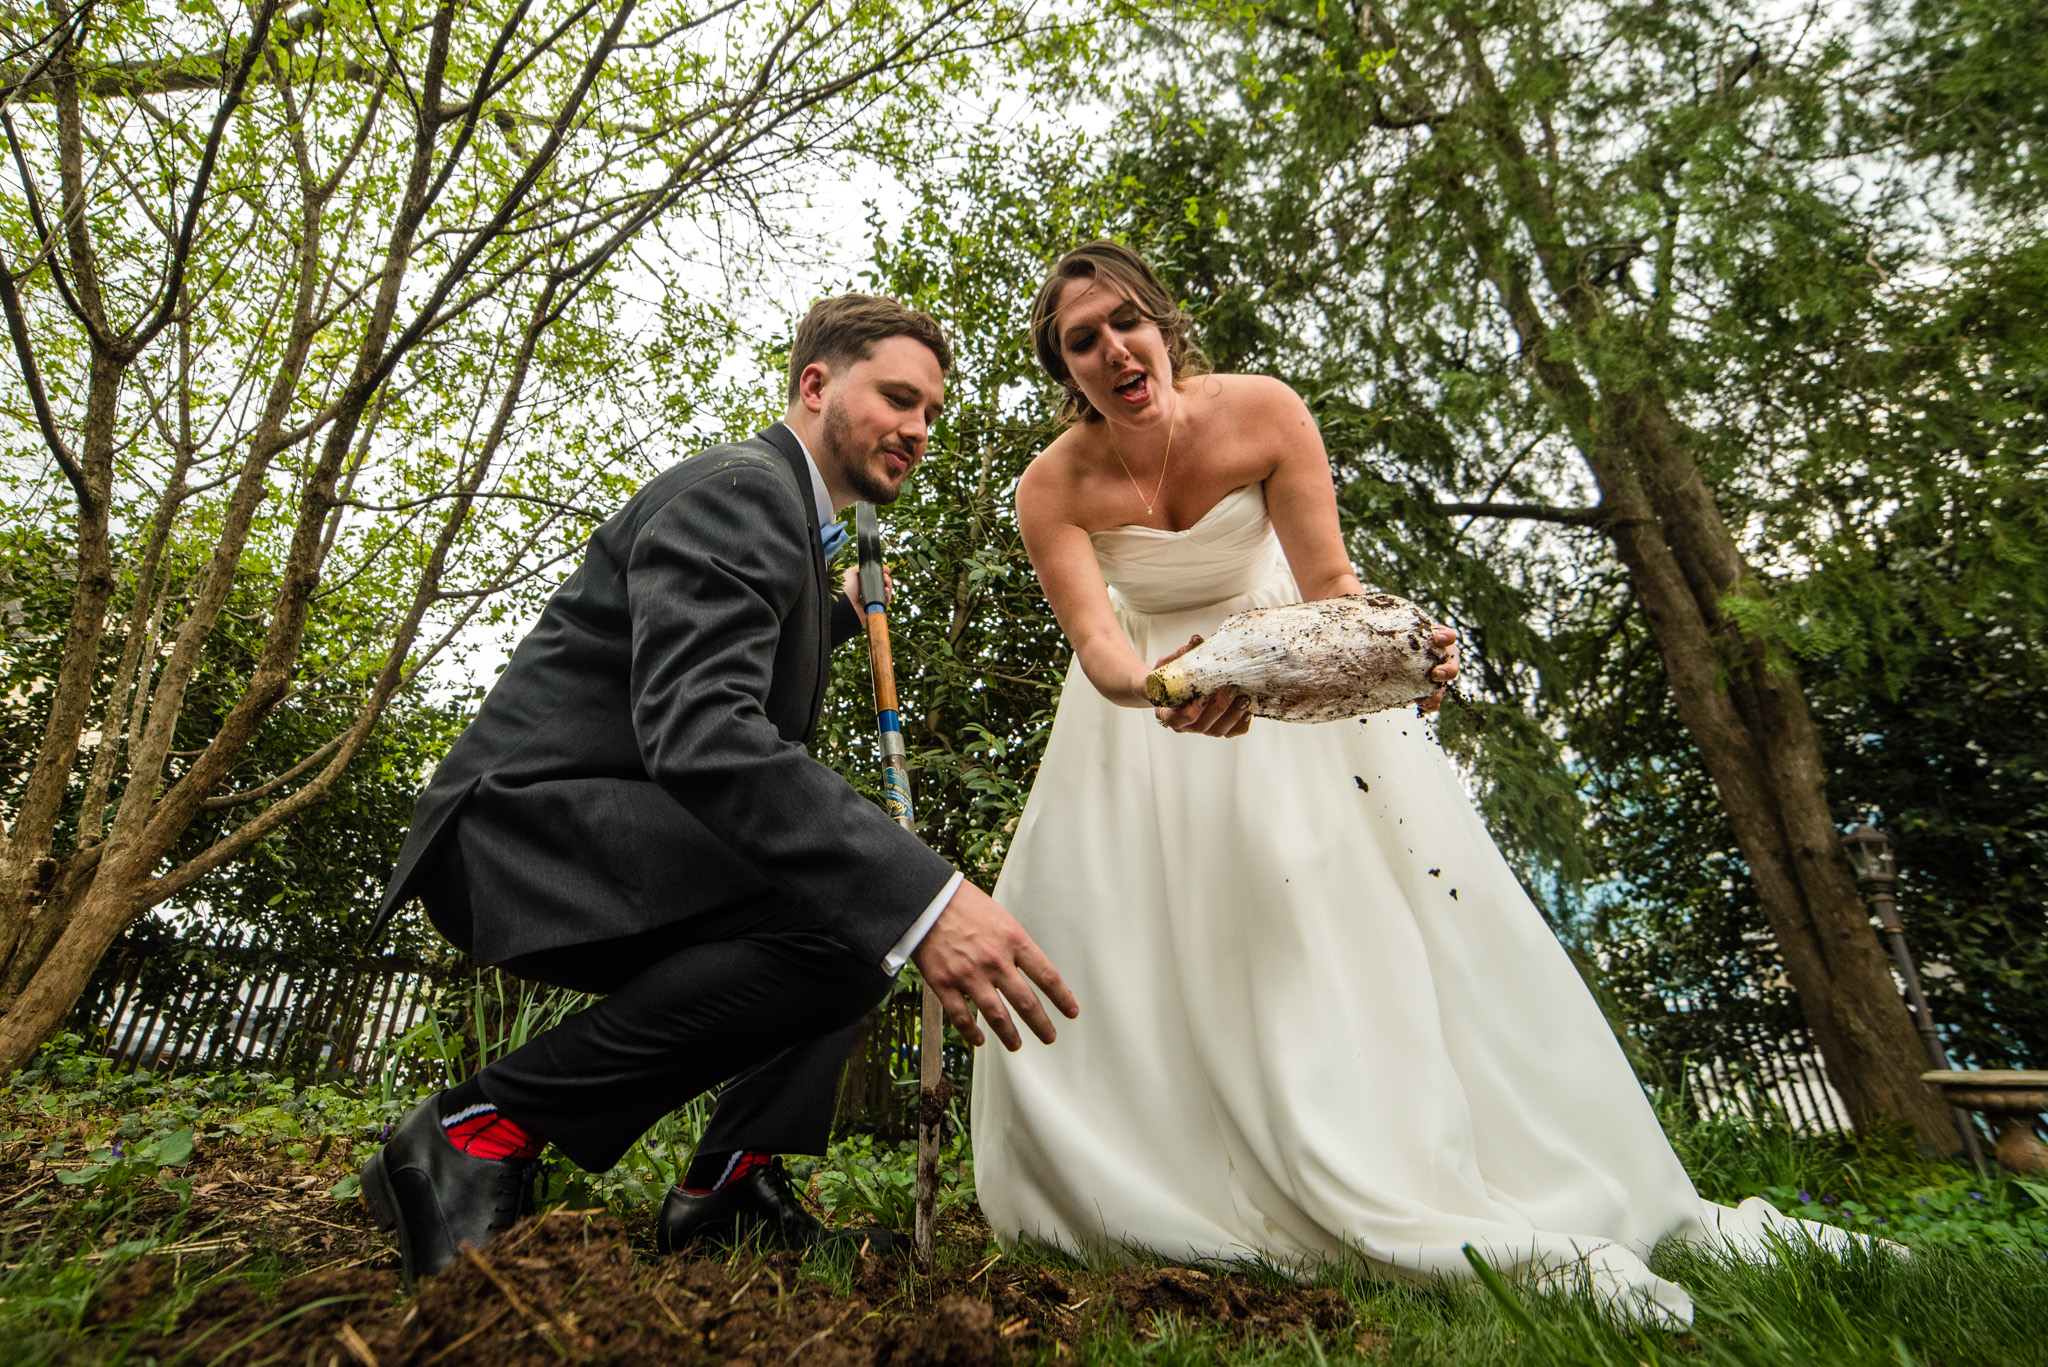 Mike and Jenna's wedding at Birkby House 